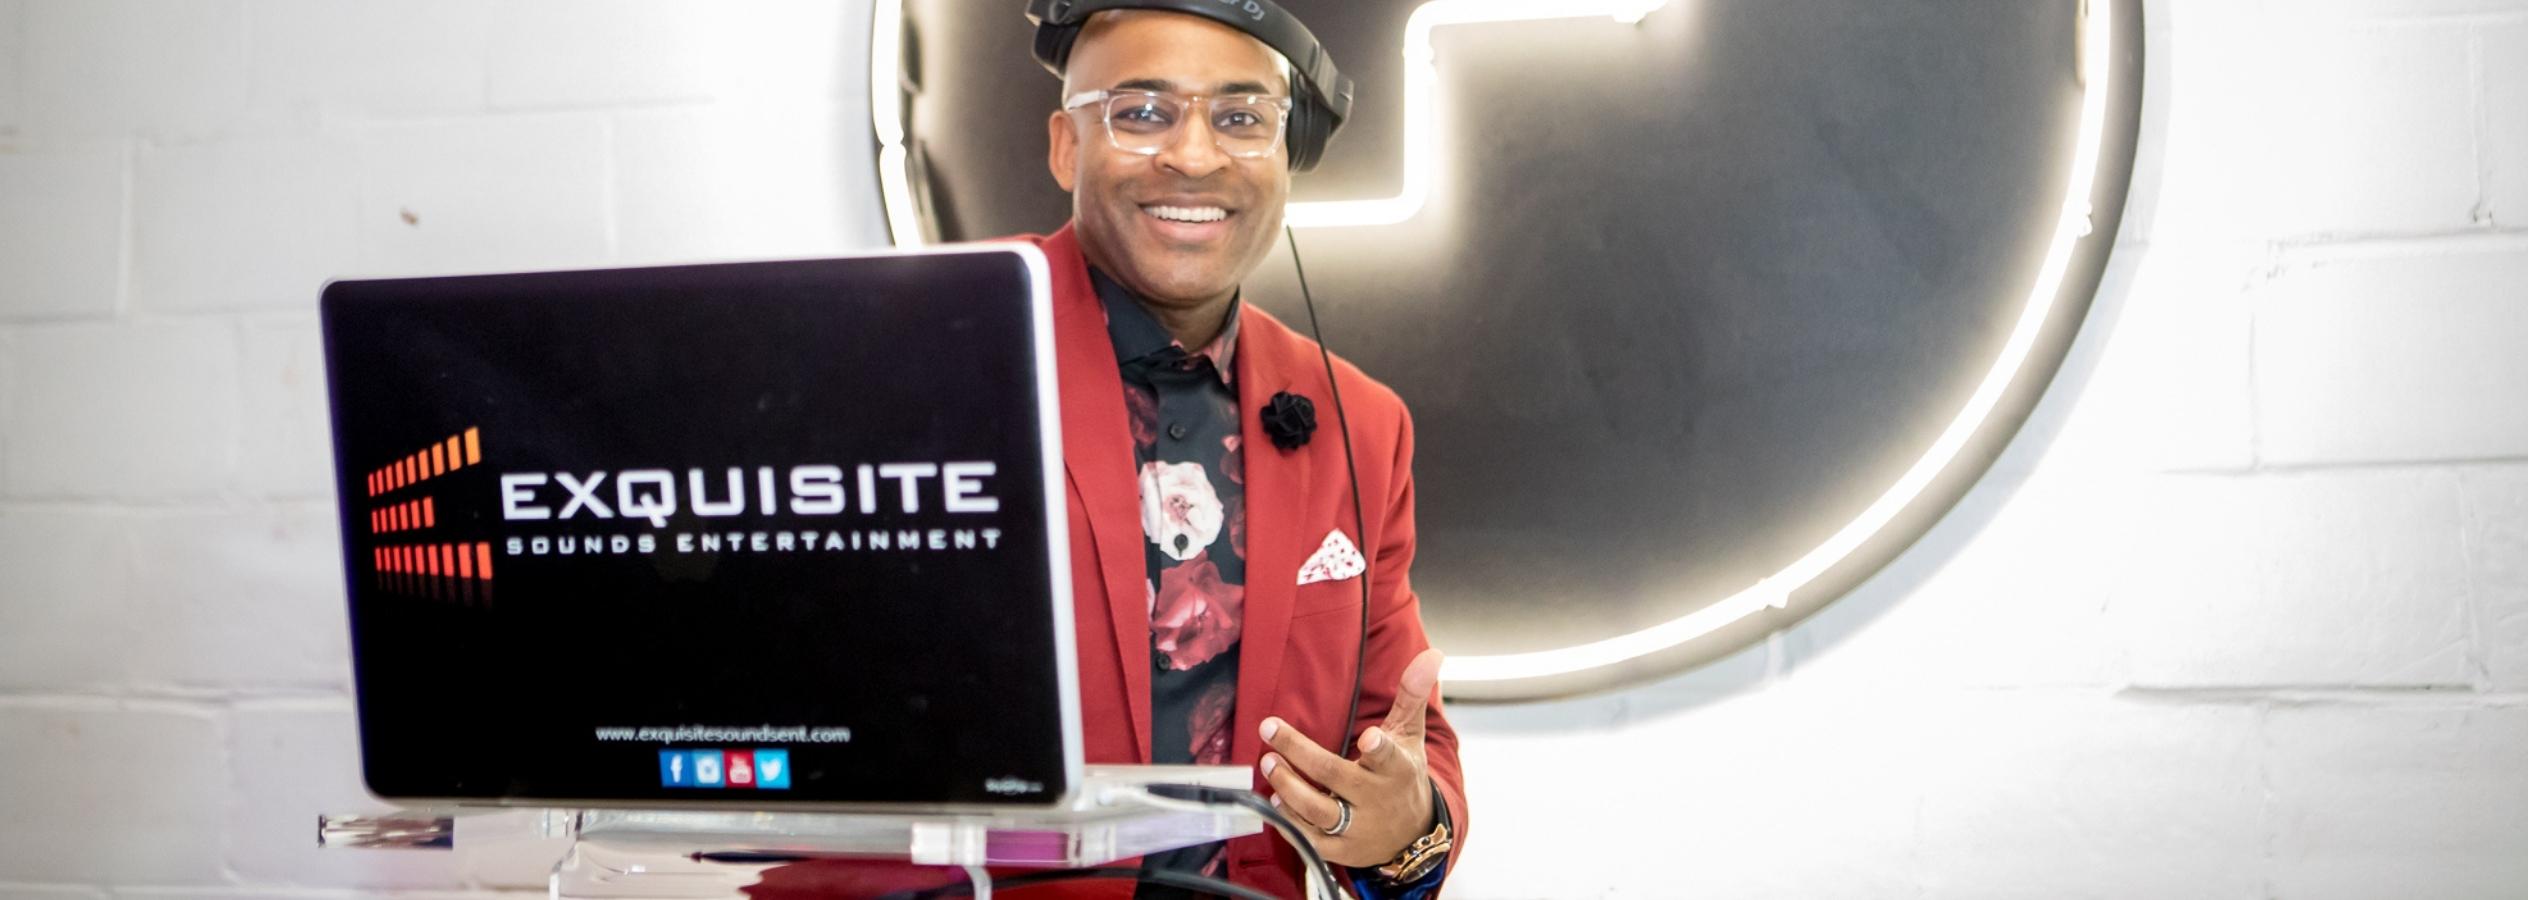 How to Select Your Wedding DJ with Exquisite Sounds Entertainment